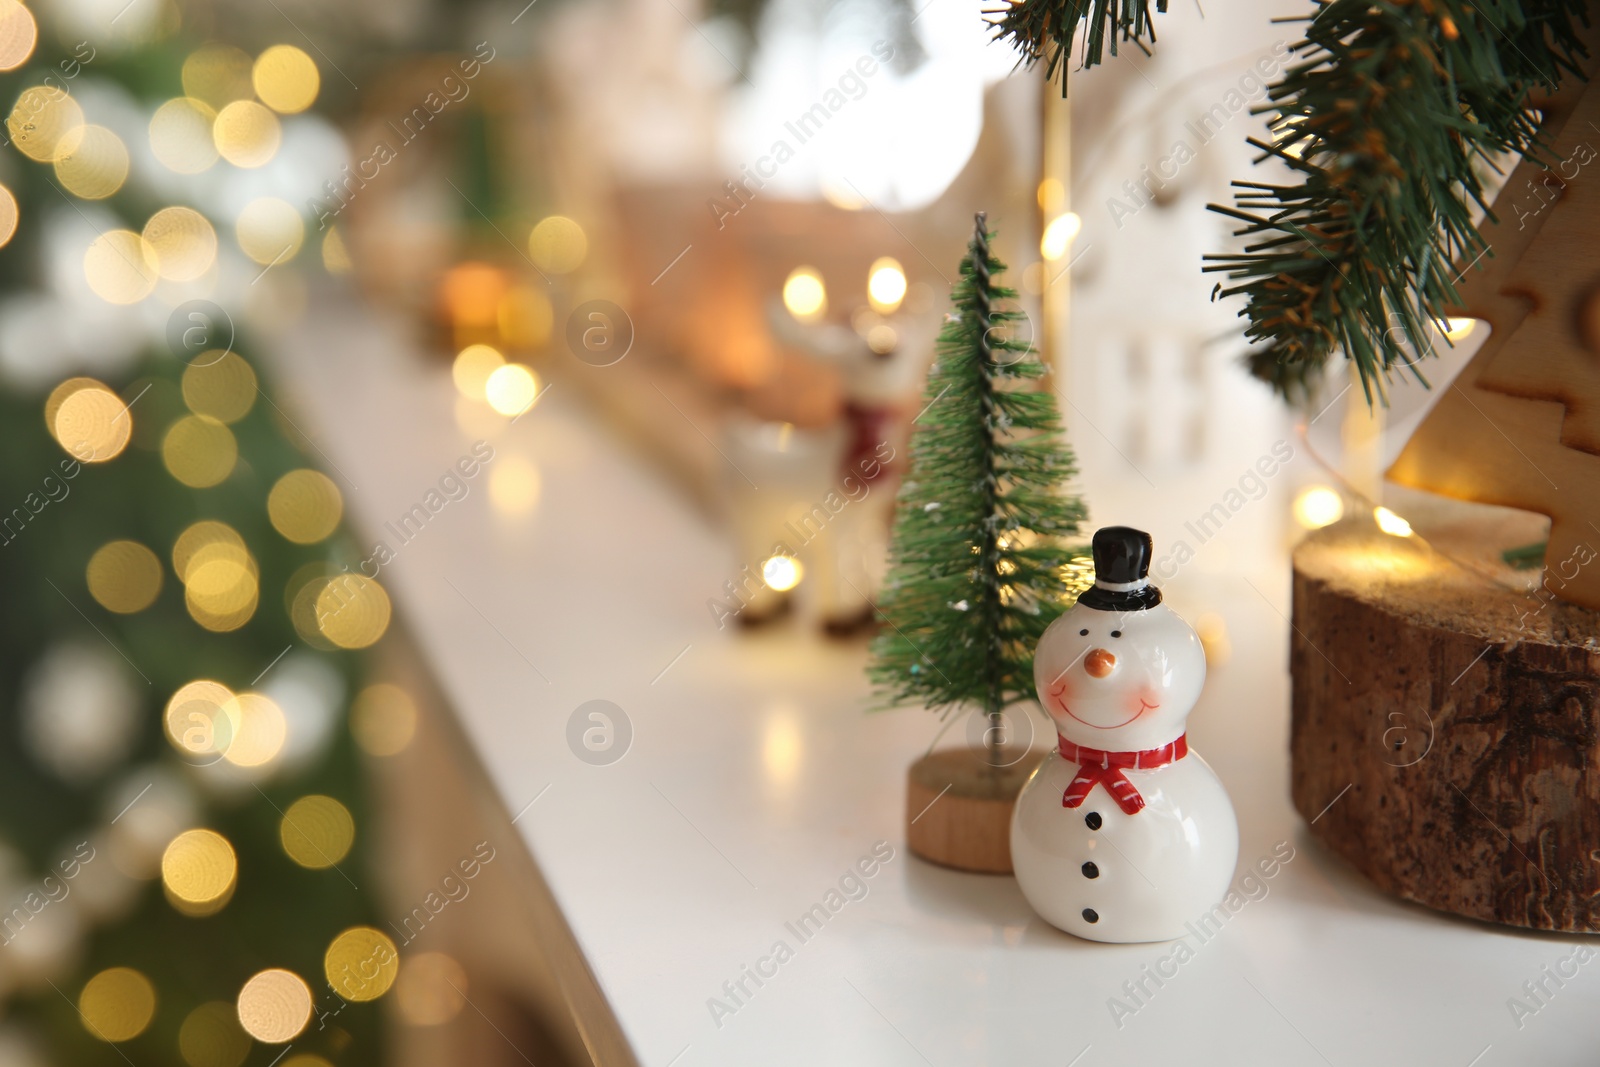 Photo of Funny ceramic snowman and small decorative tree on white table against blurred lights. Space for text